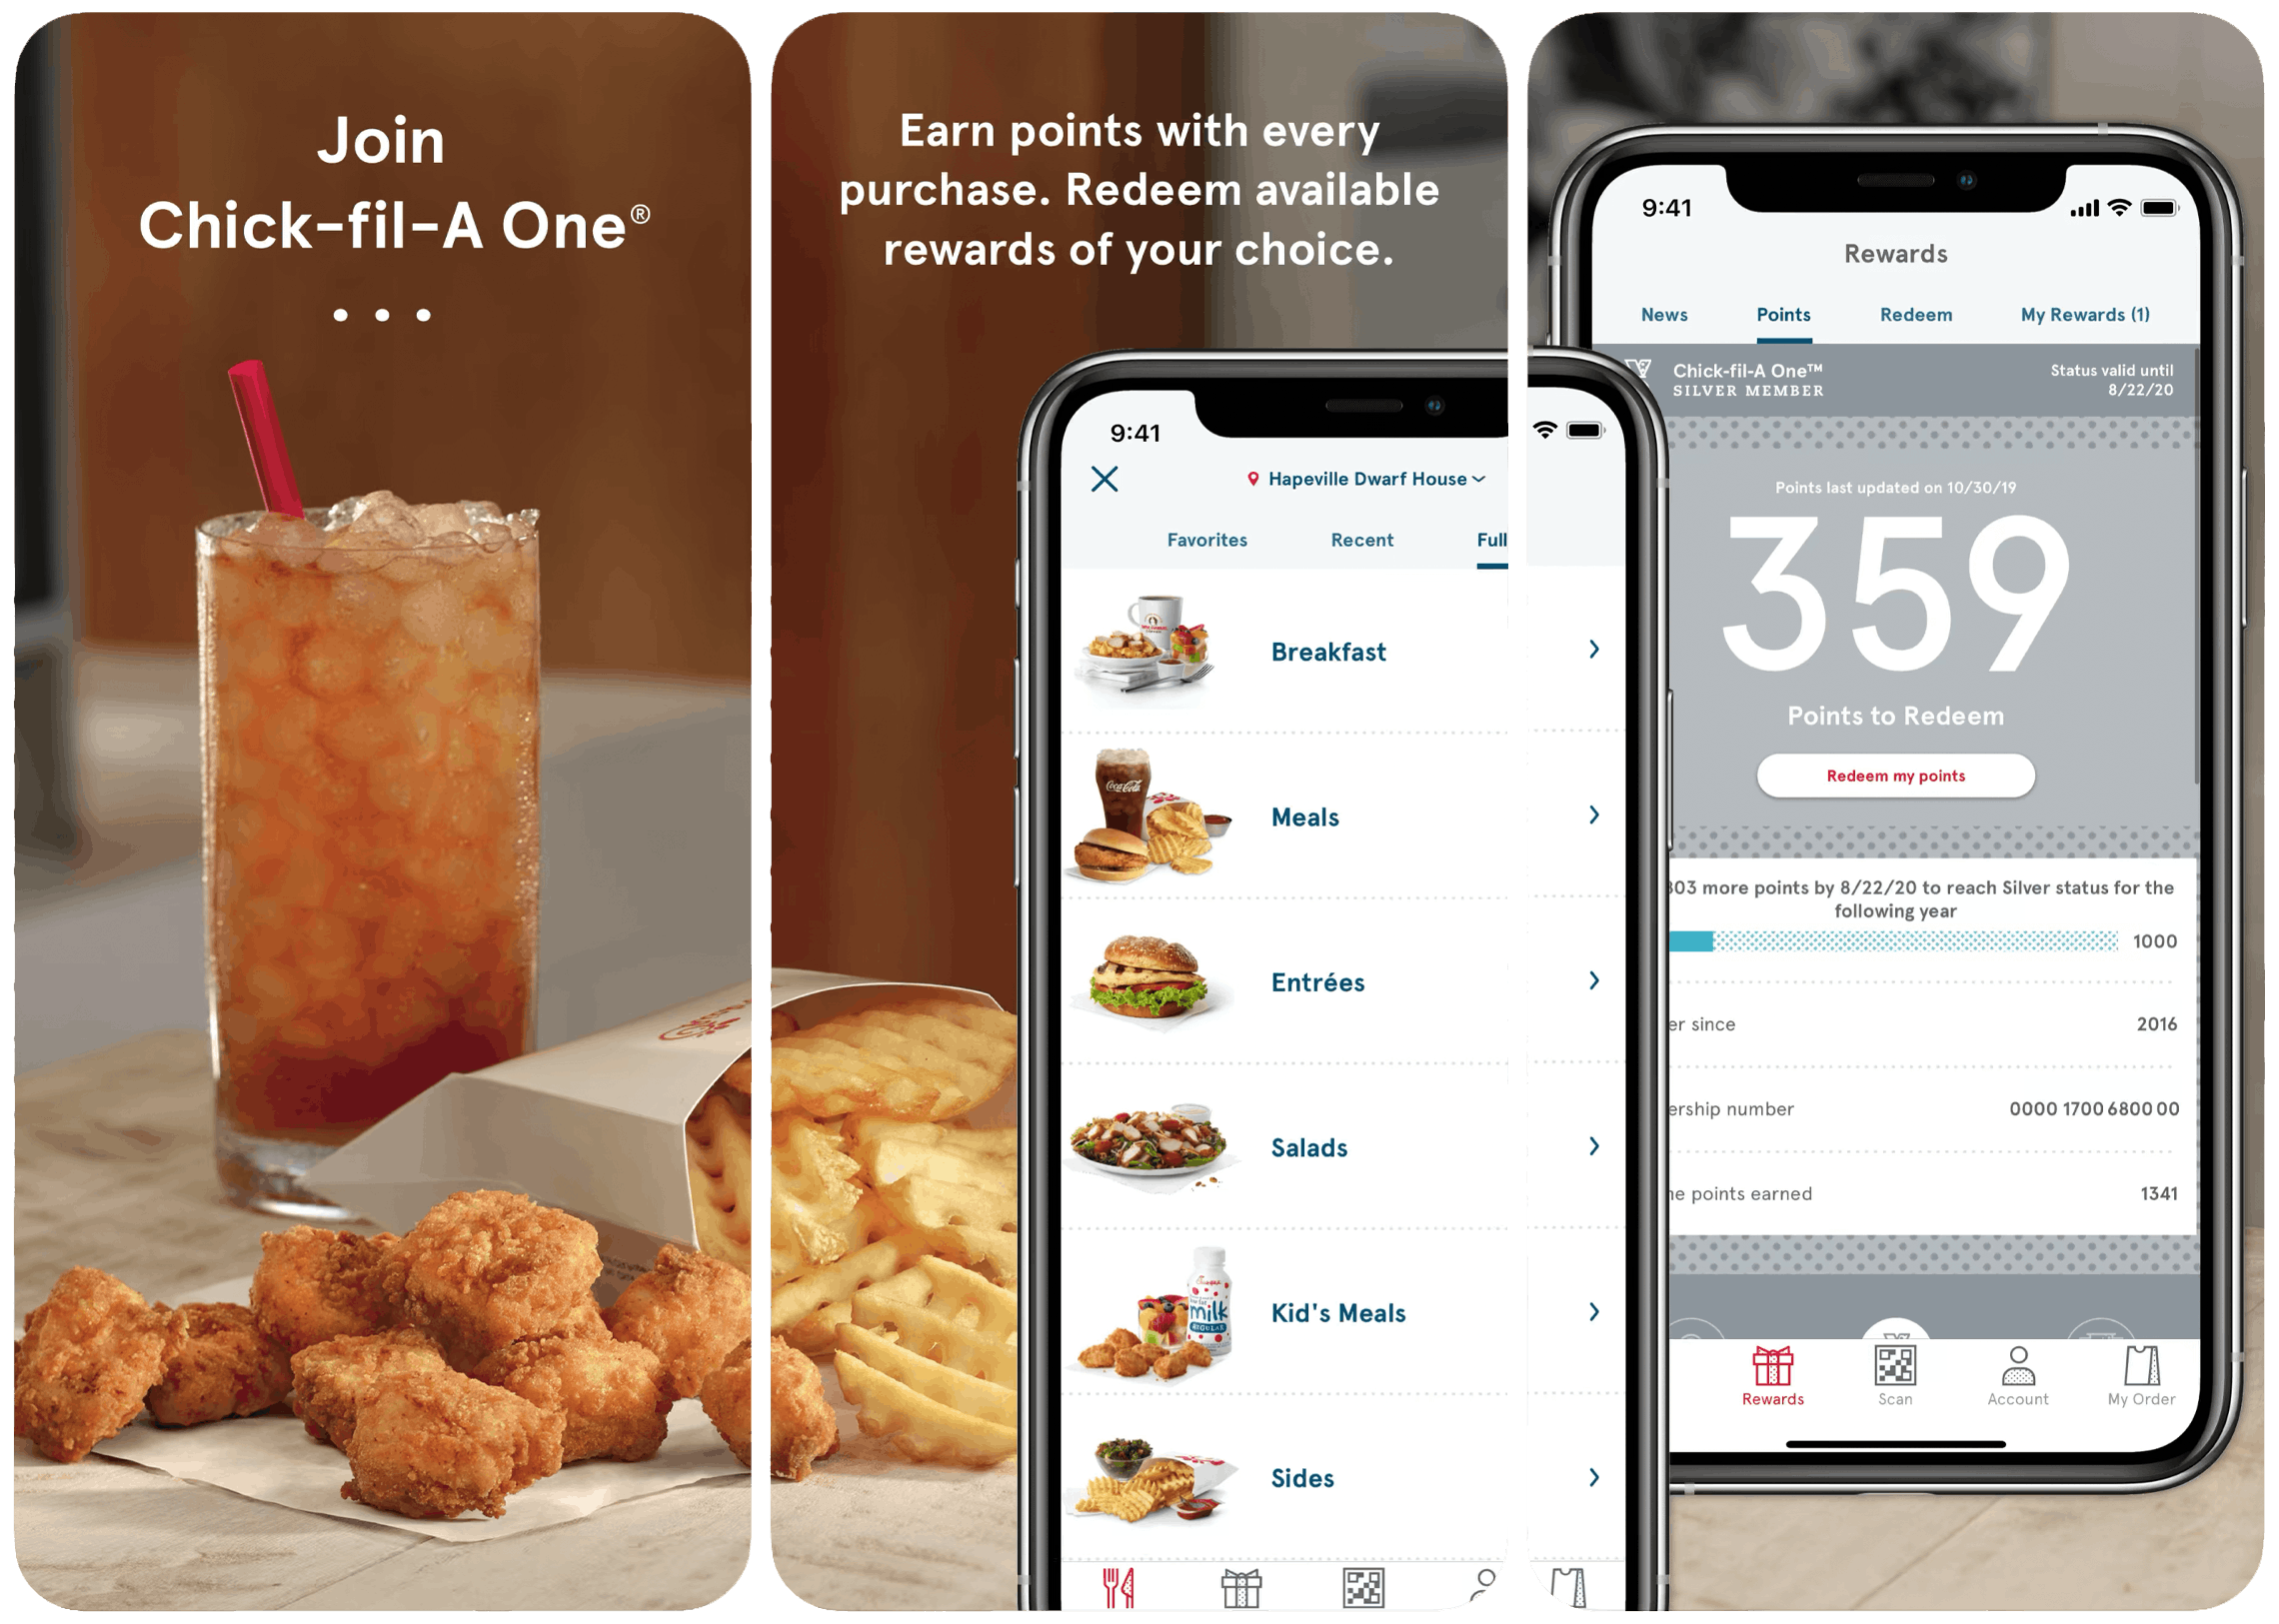 An advertisement for the Chick-fil-A app and rewards.